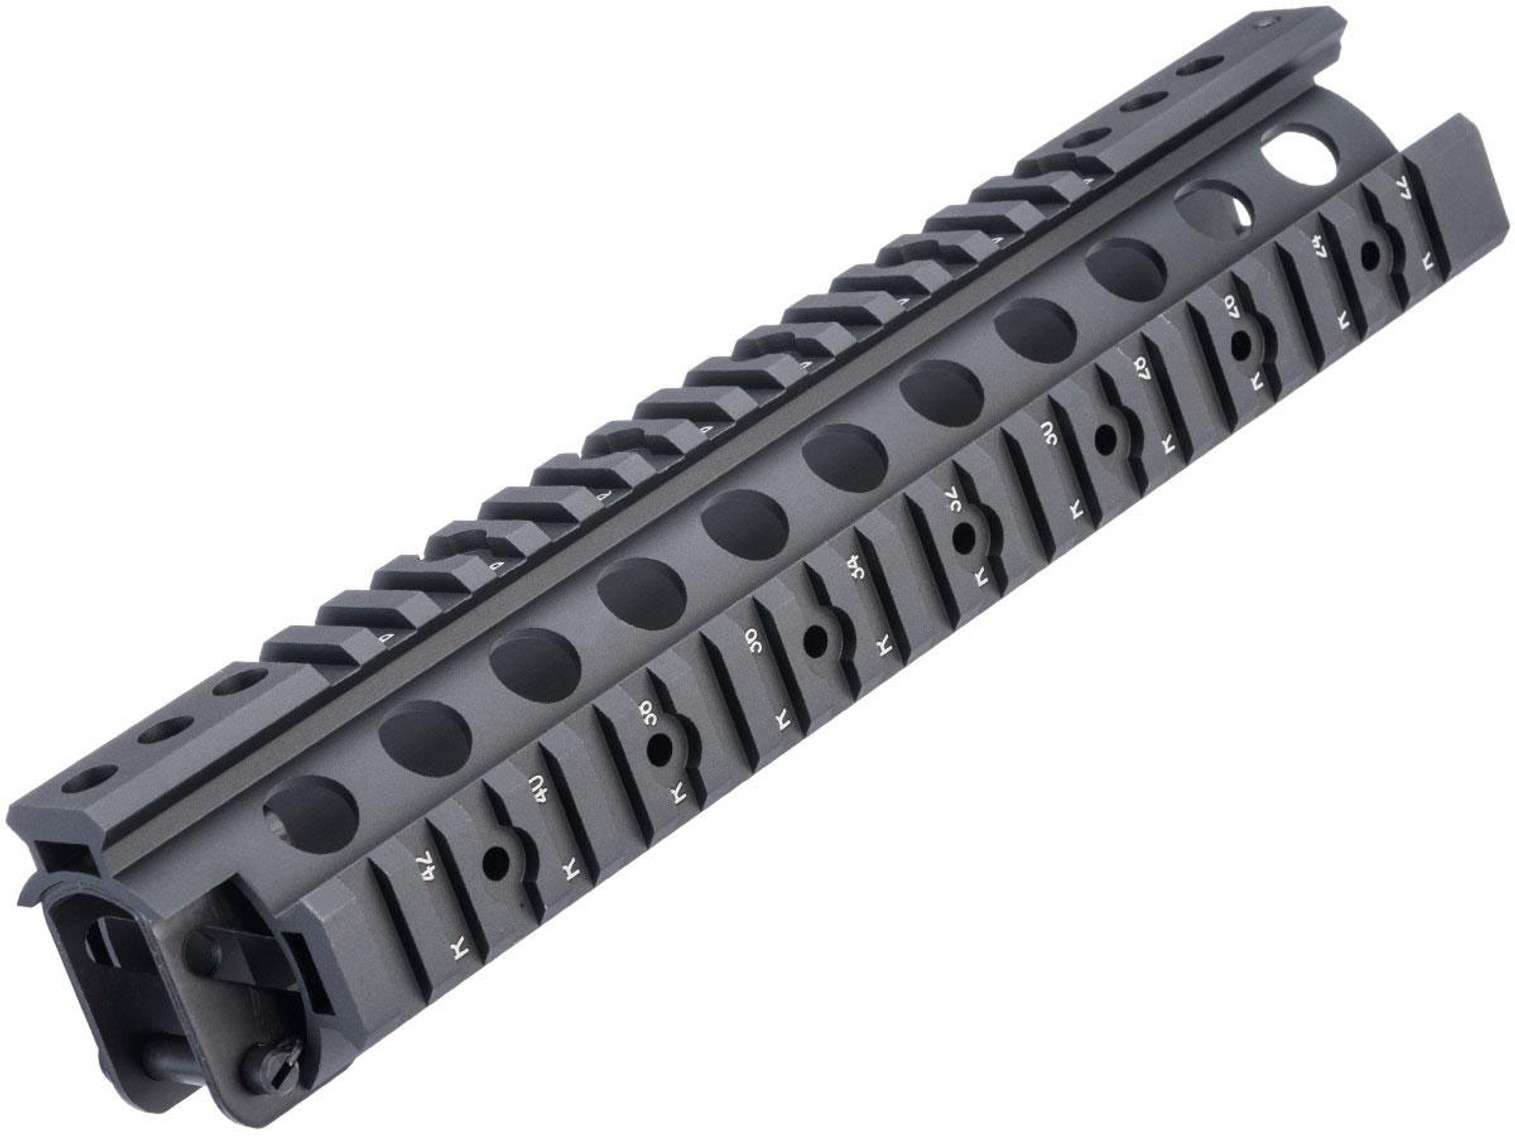 LCT RIS Handguard for LK-33 Airsoft AEGs